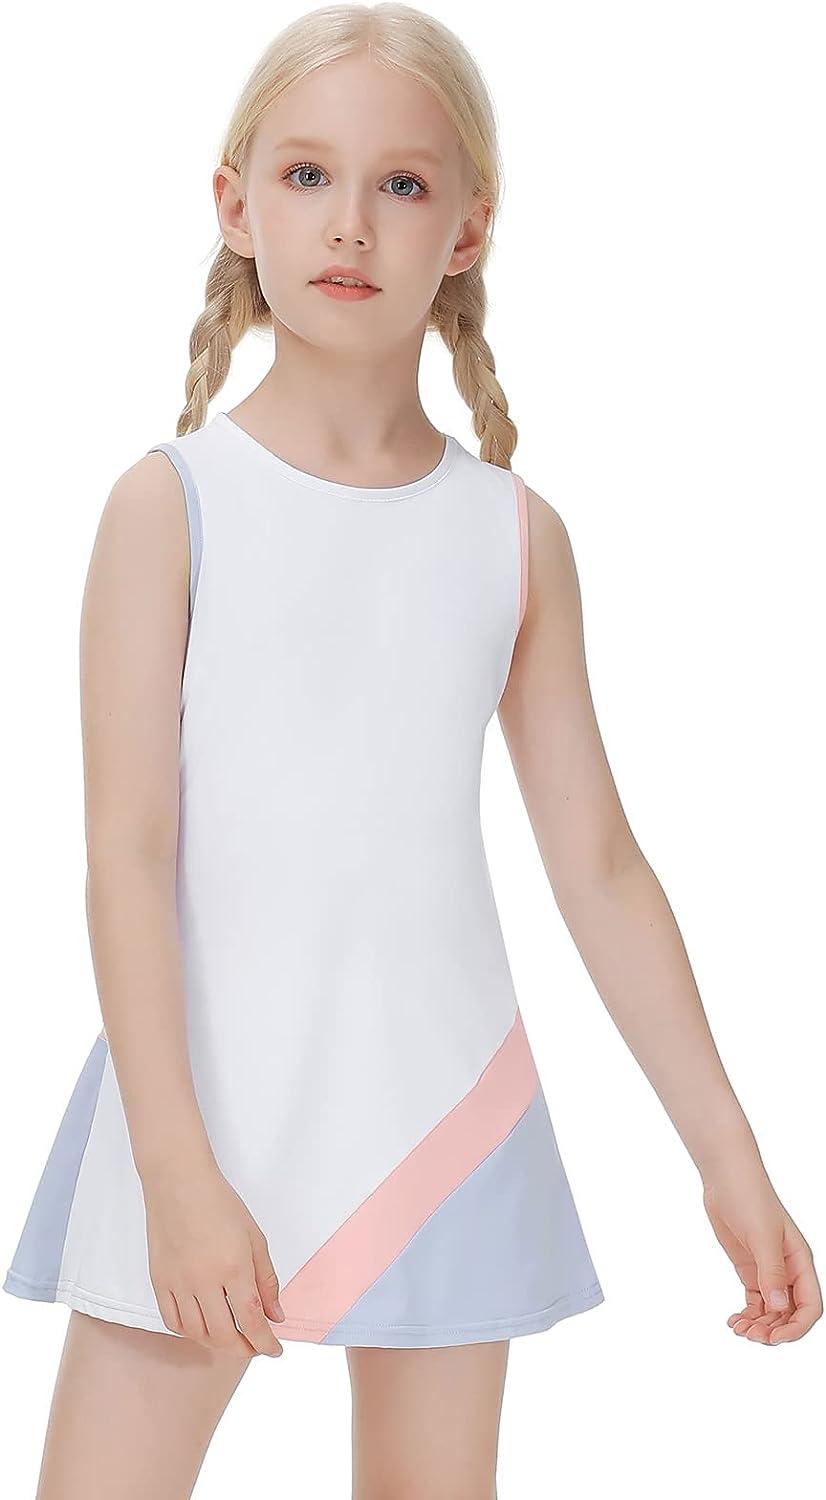 JACK SMITH Youth Girls Tennis Dresses Golf Sleeveless Outfit